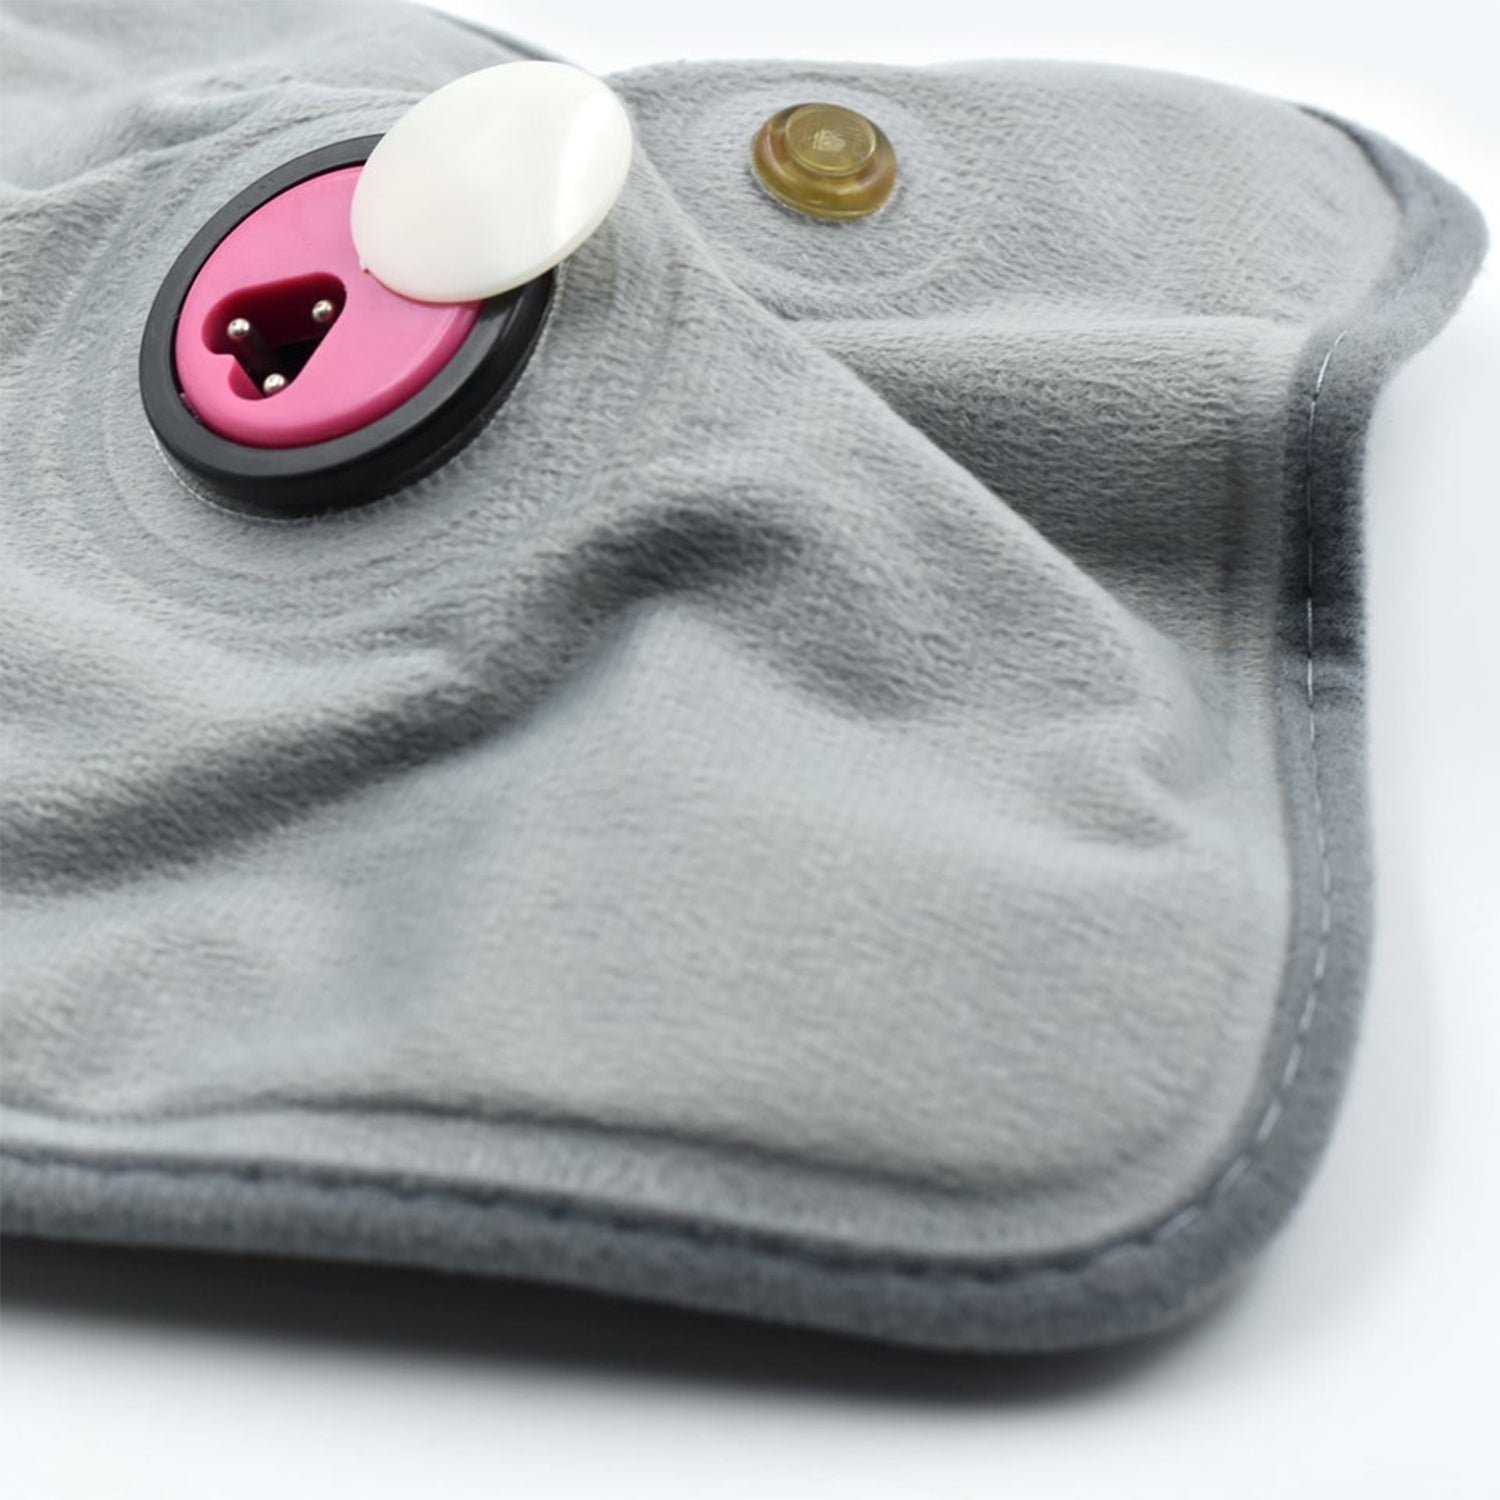 0381B Heating Bag and Heating Pad Used to Ease Pain in Joints, Muscles and Soft Tissues Etc.